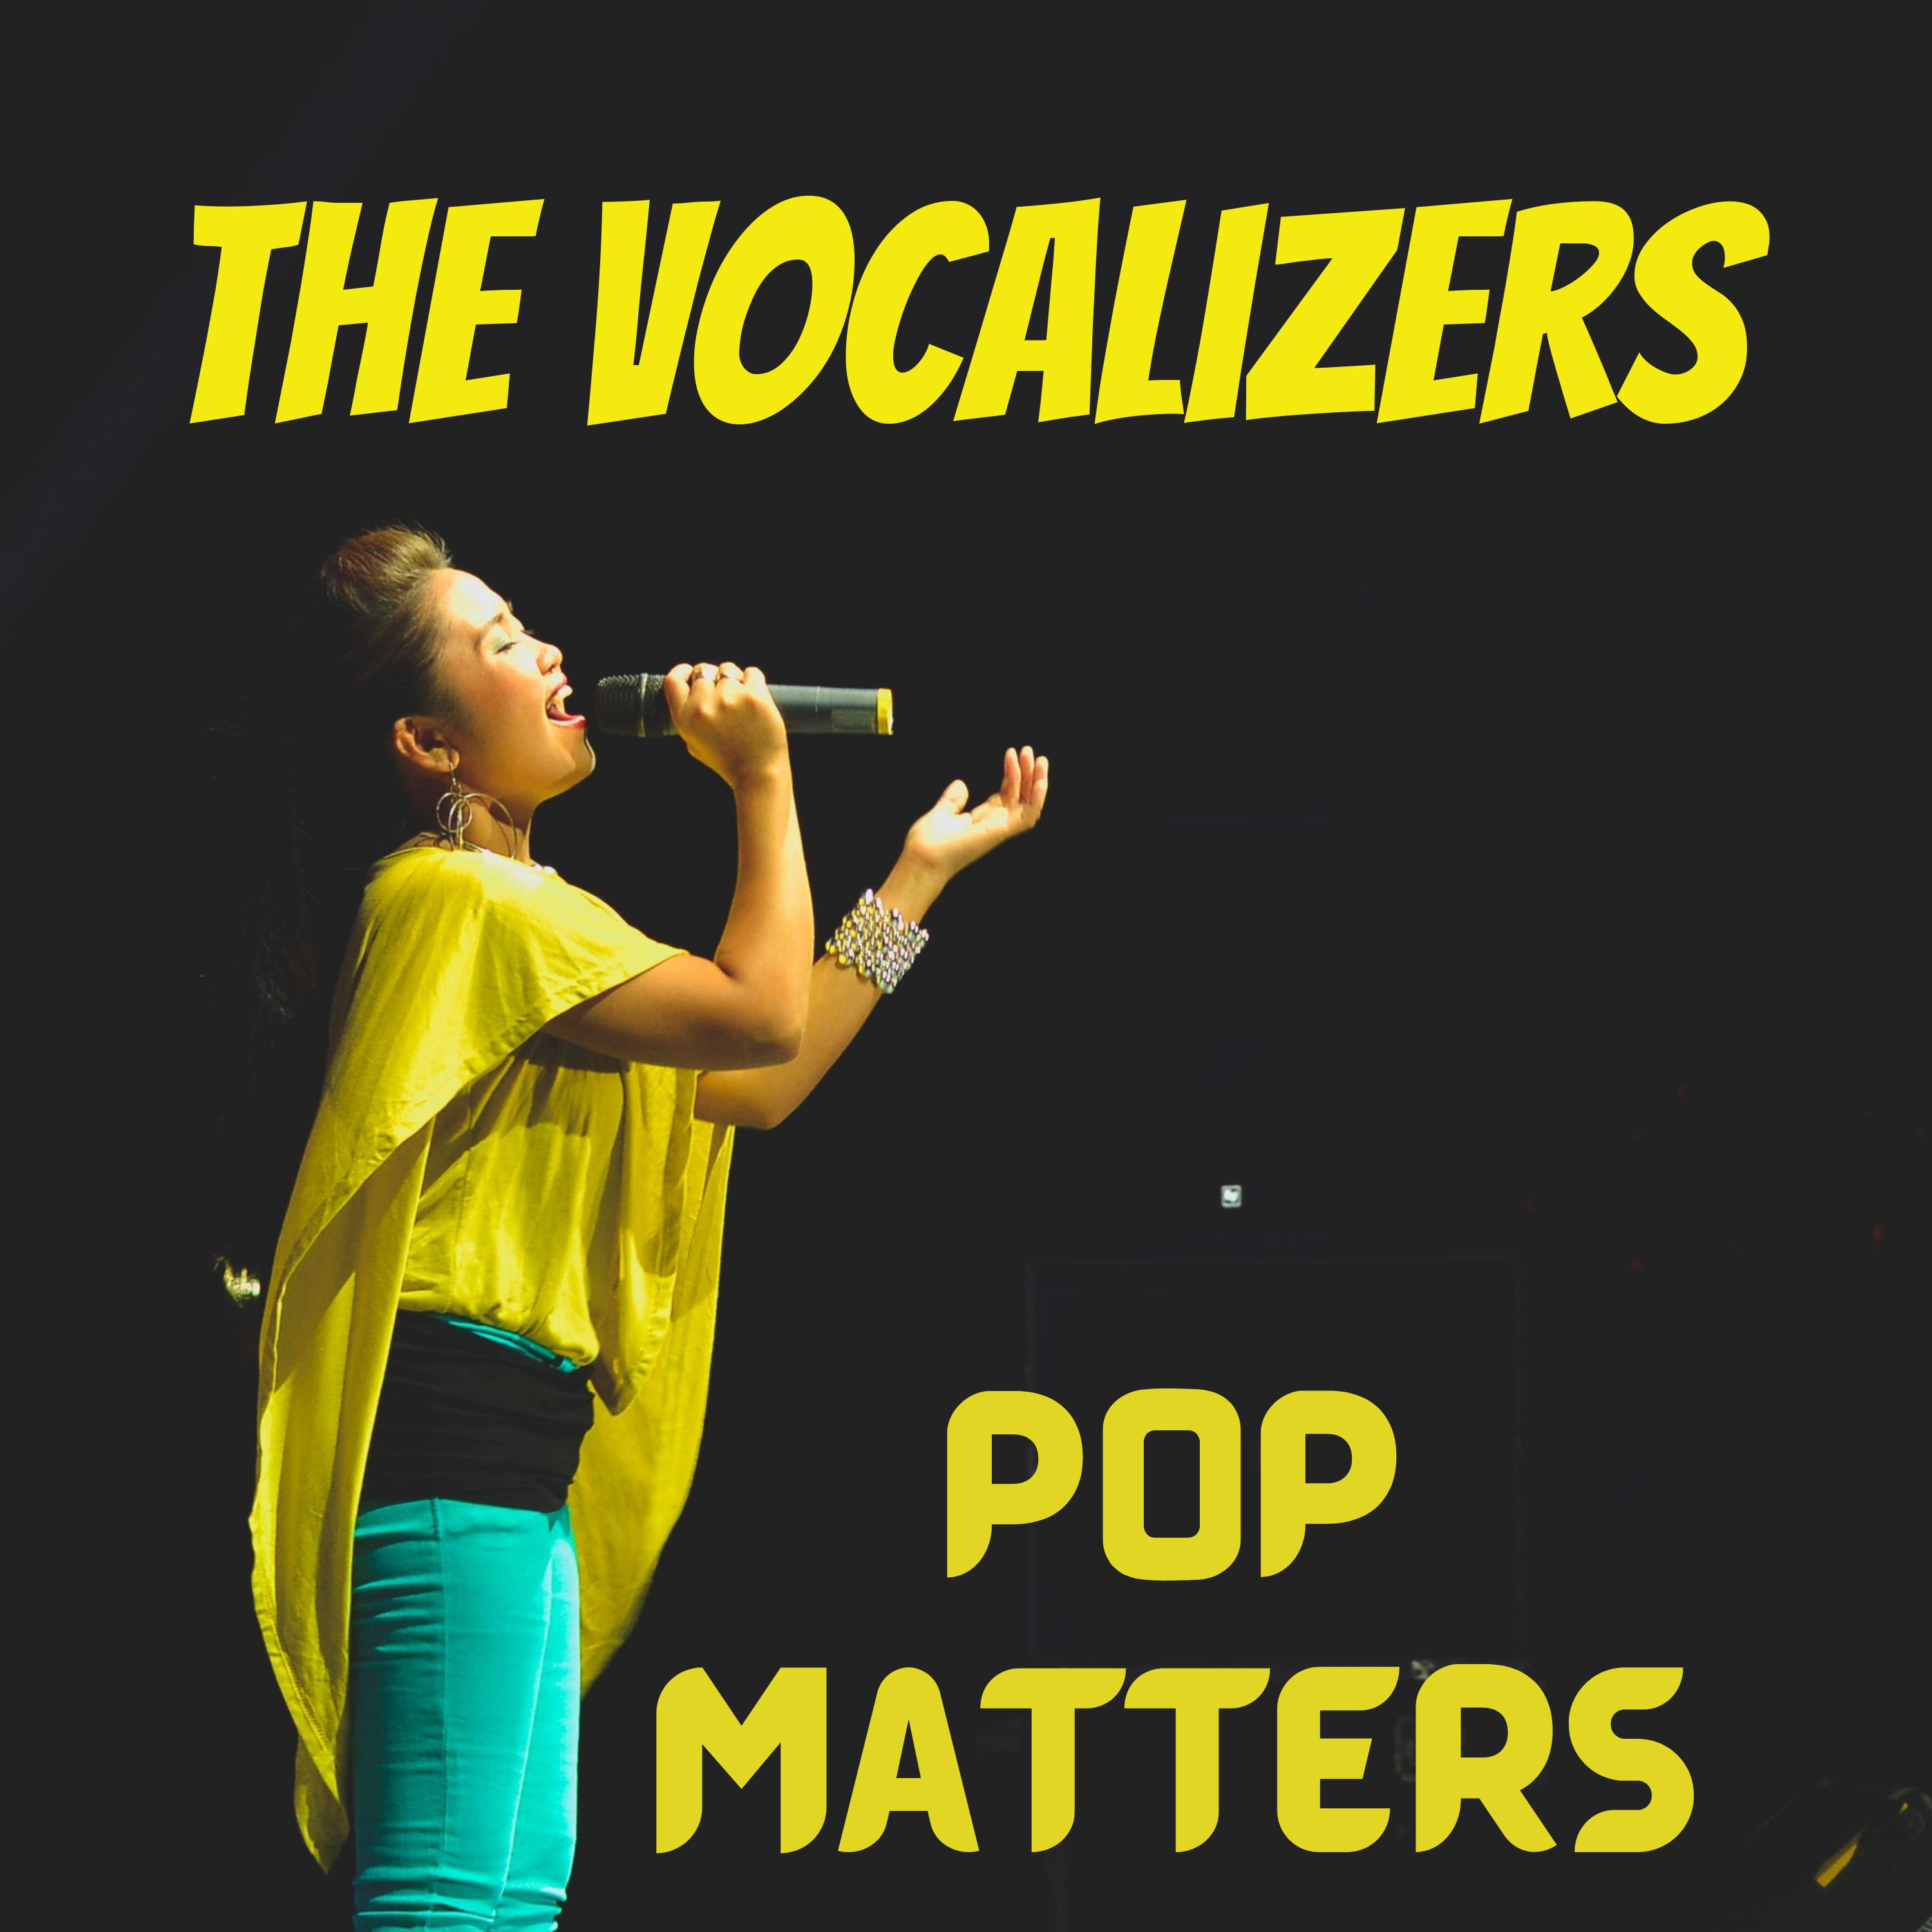 Join The Vocalizers